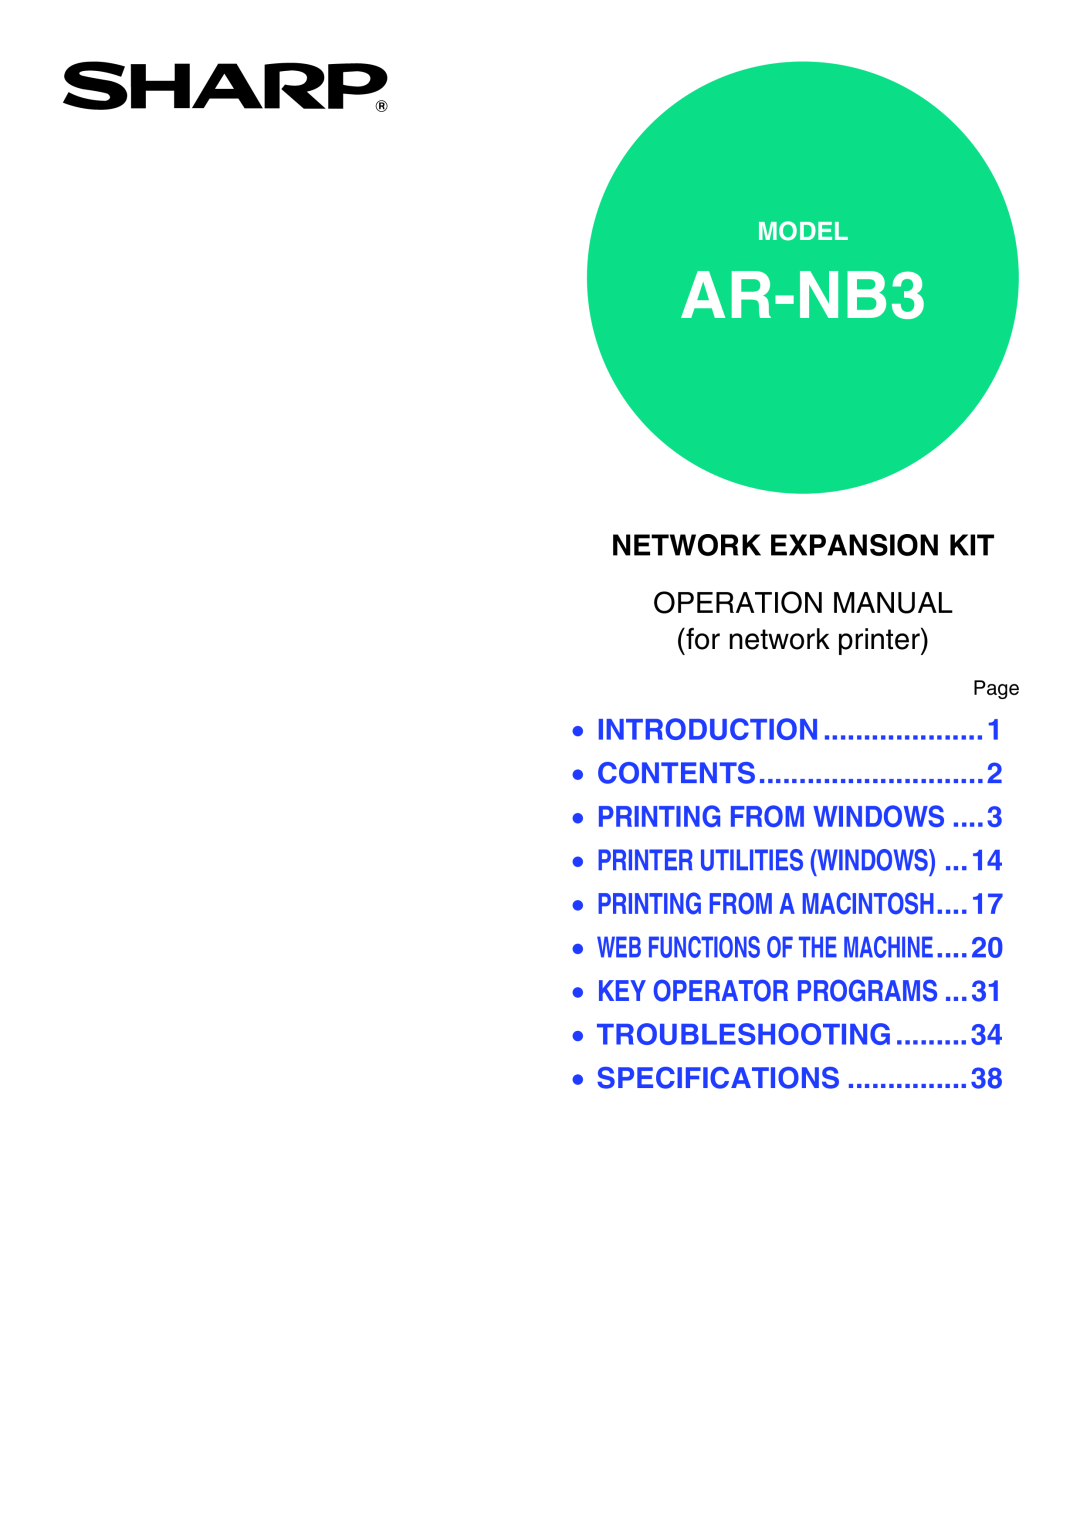 Sharp AR-NB3 operation manual Network Expansion Kit, Page, Web Functions Of The Machine, Operation Manual, Introduction 